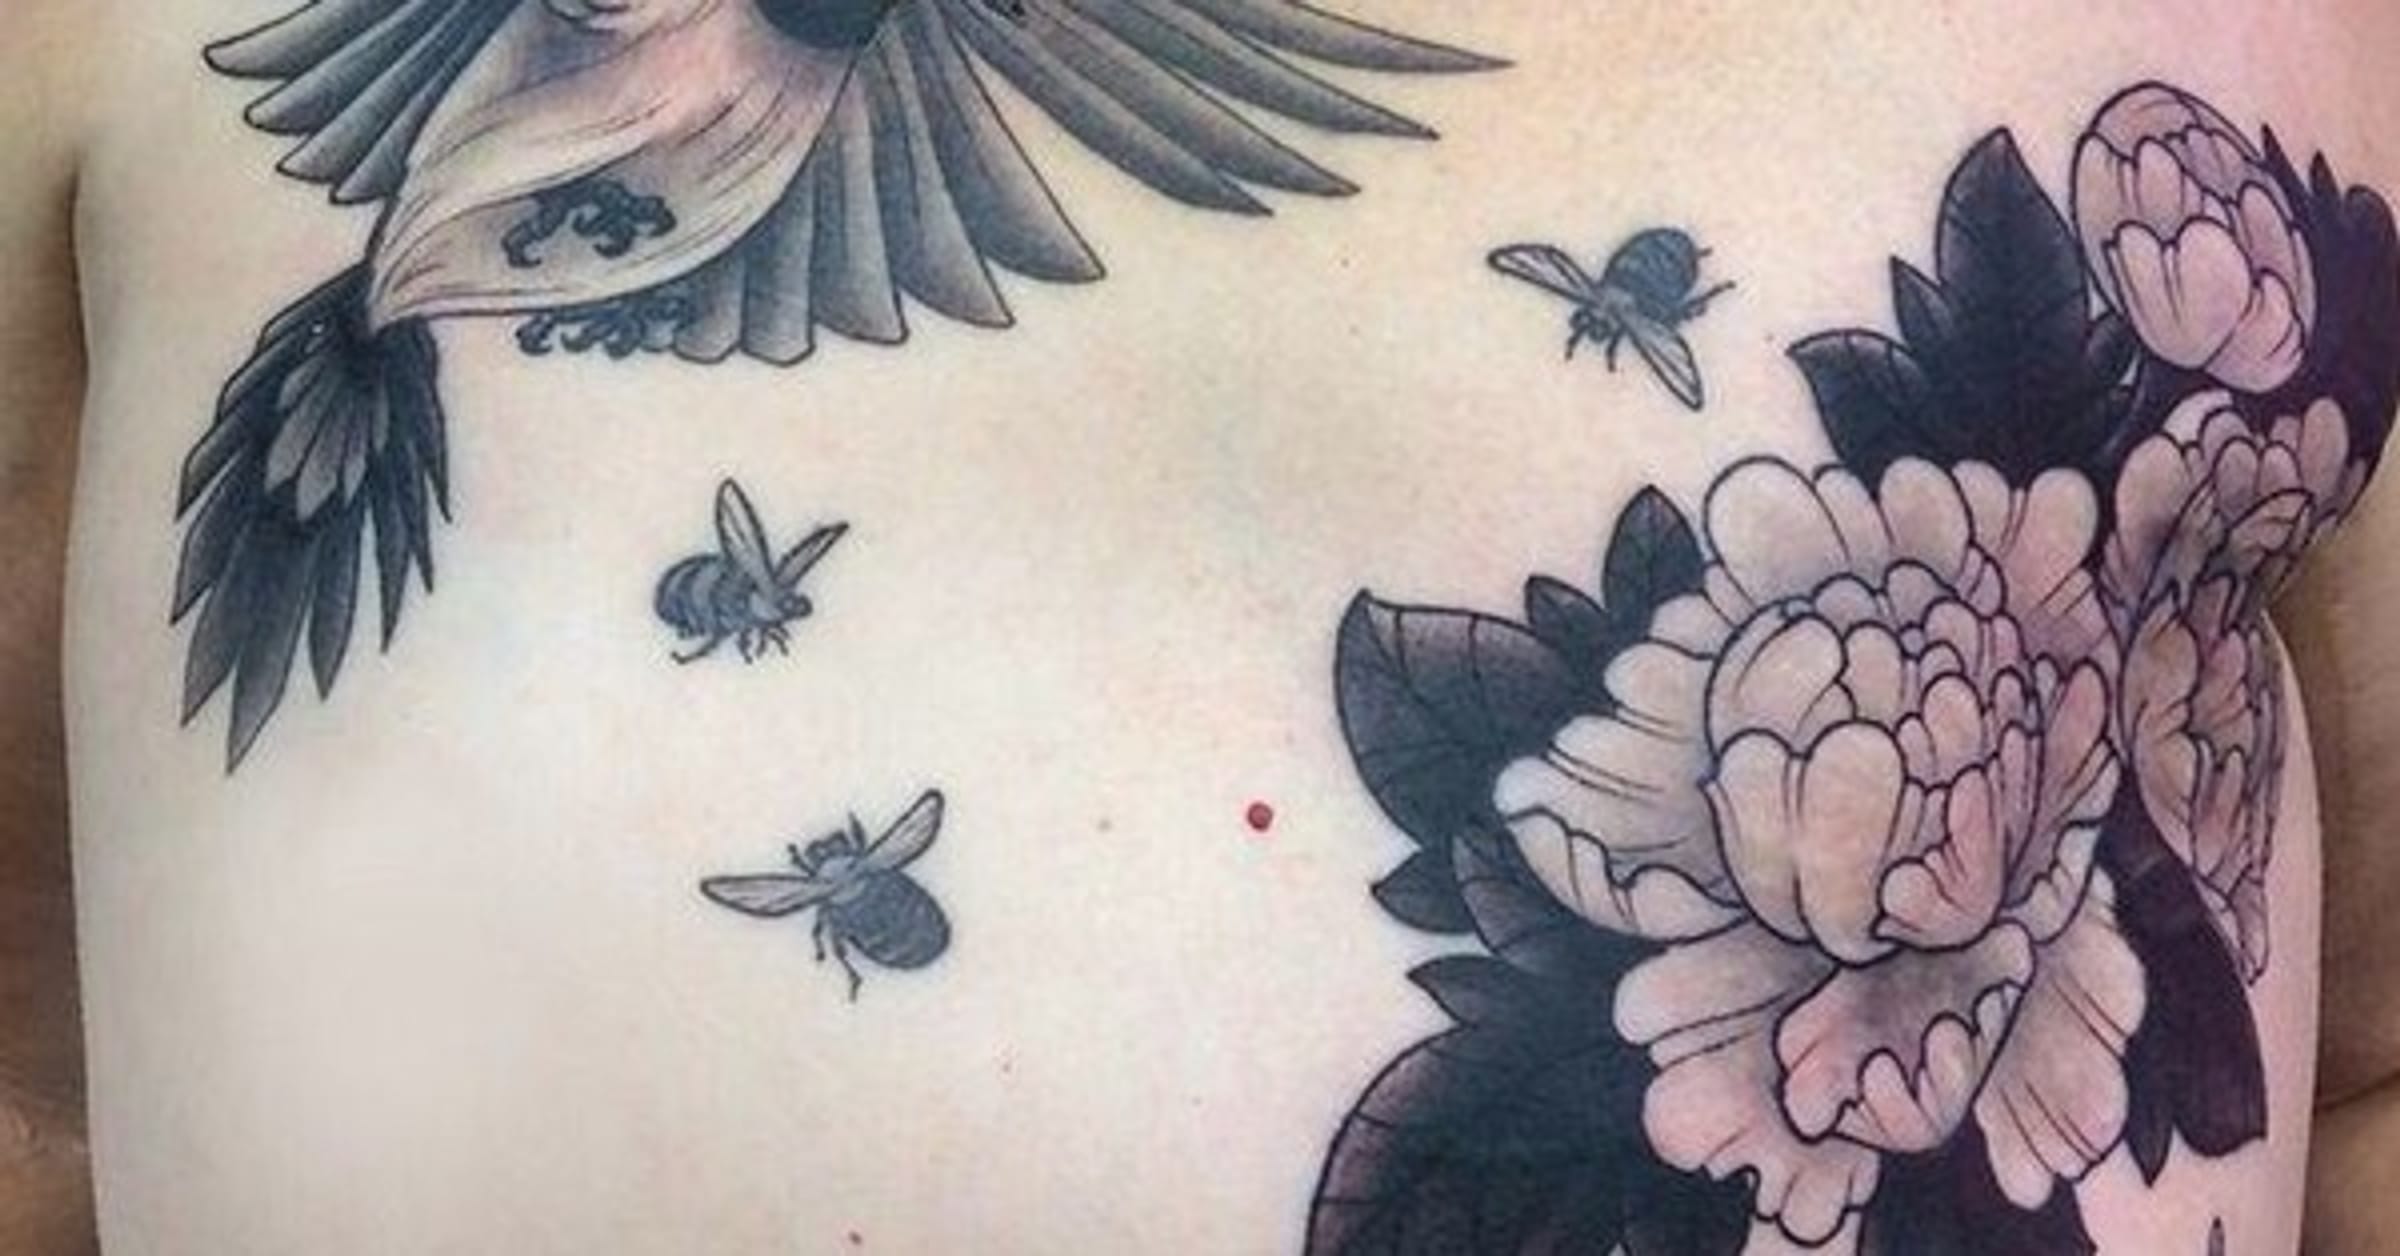 For many cancer survivors, tattoos are 'a badge of honour' - The